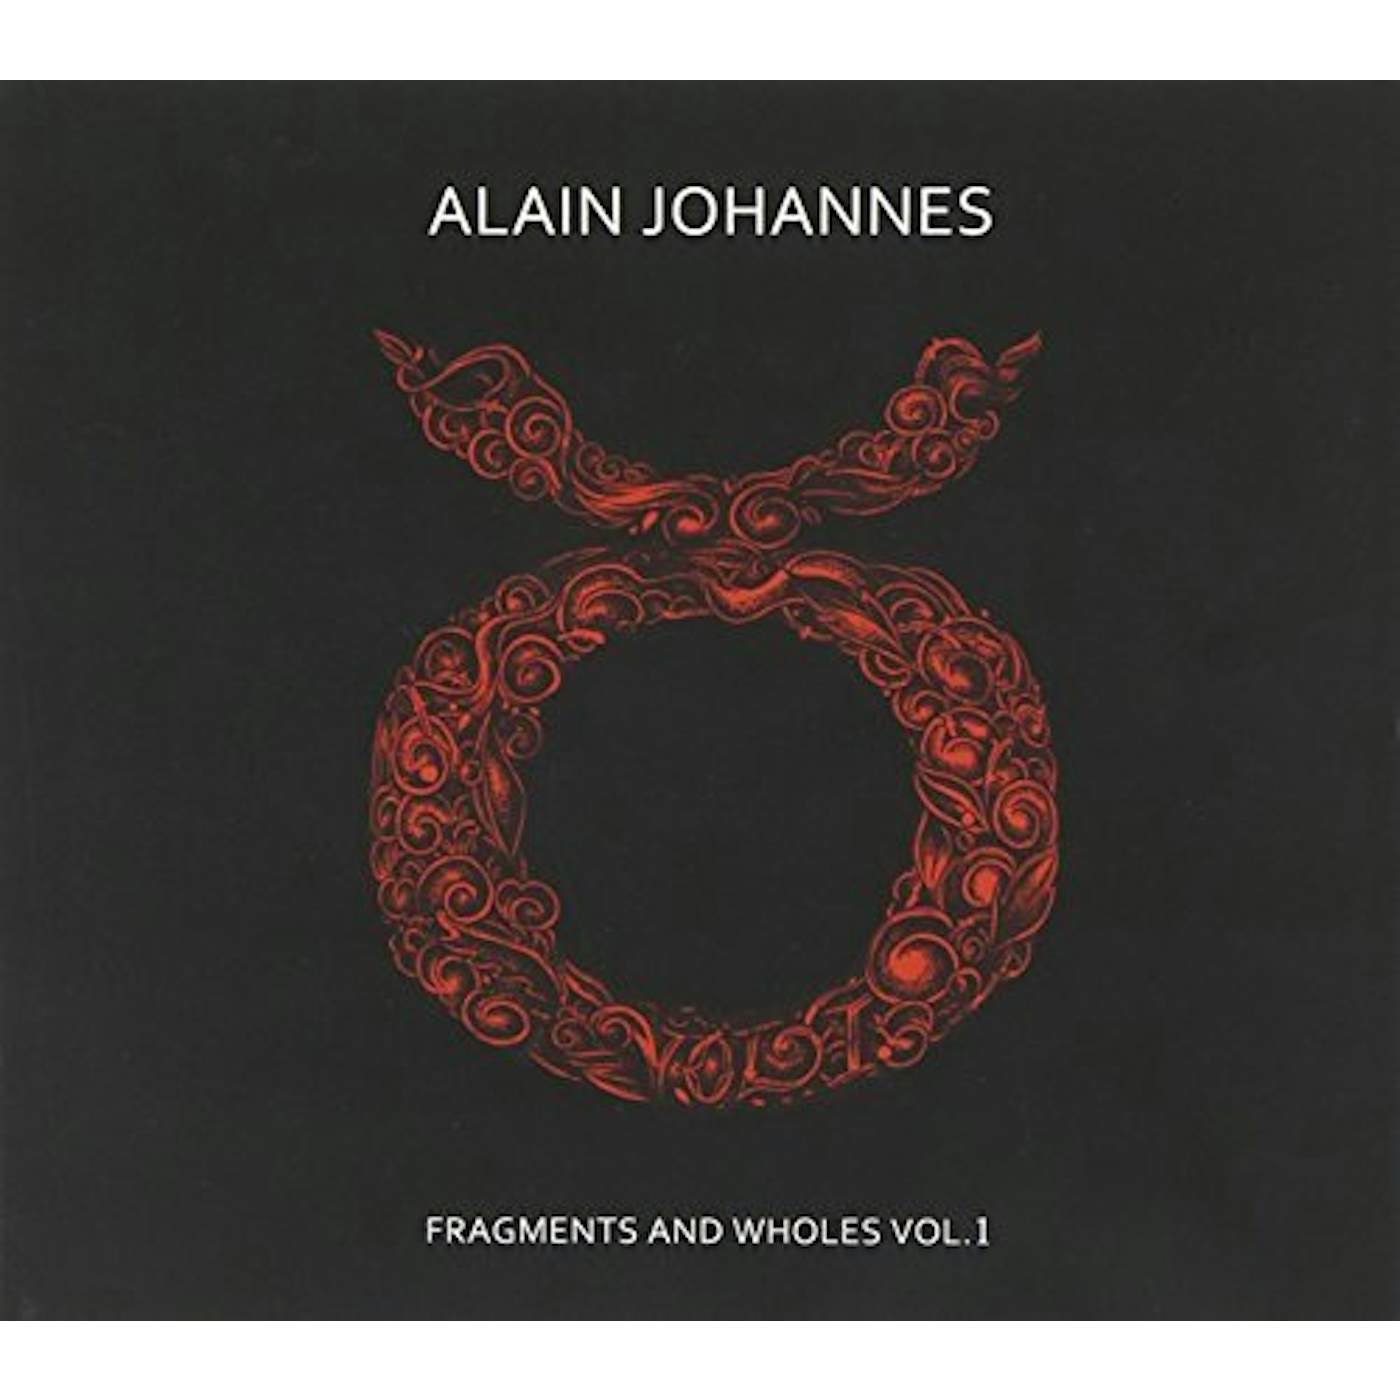 Alain Johannes FRAGMENTS AND WHOLES 1 CD